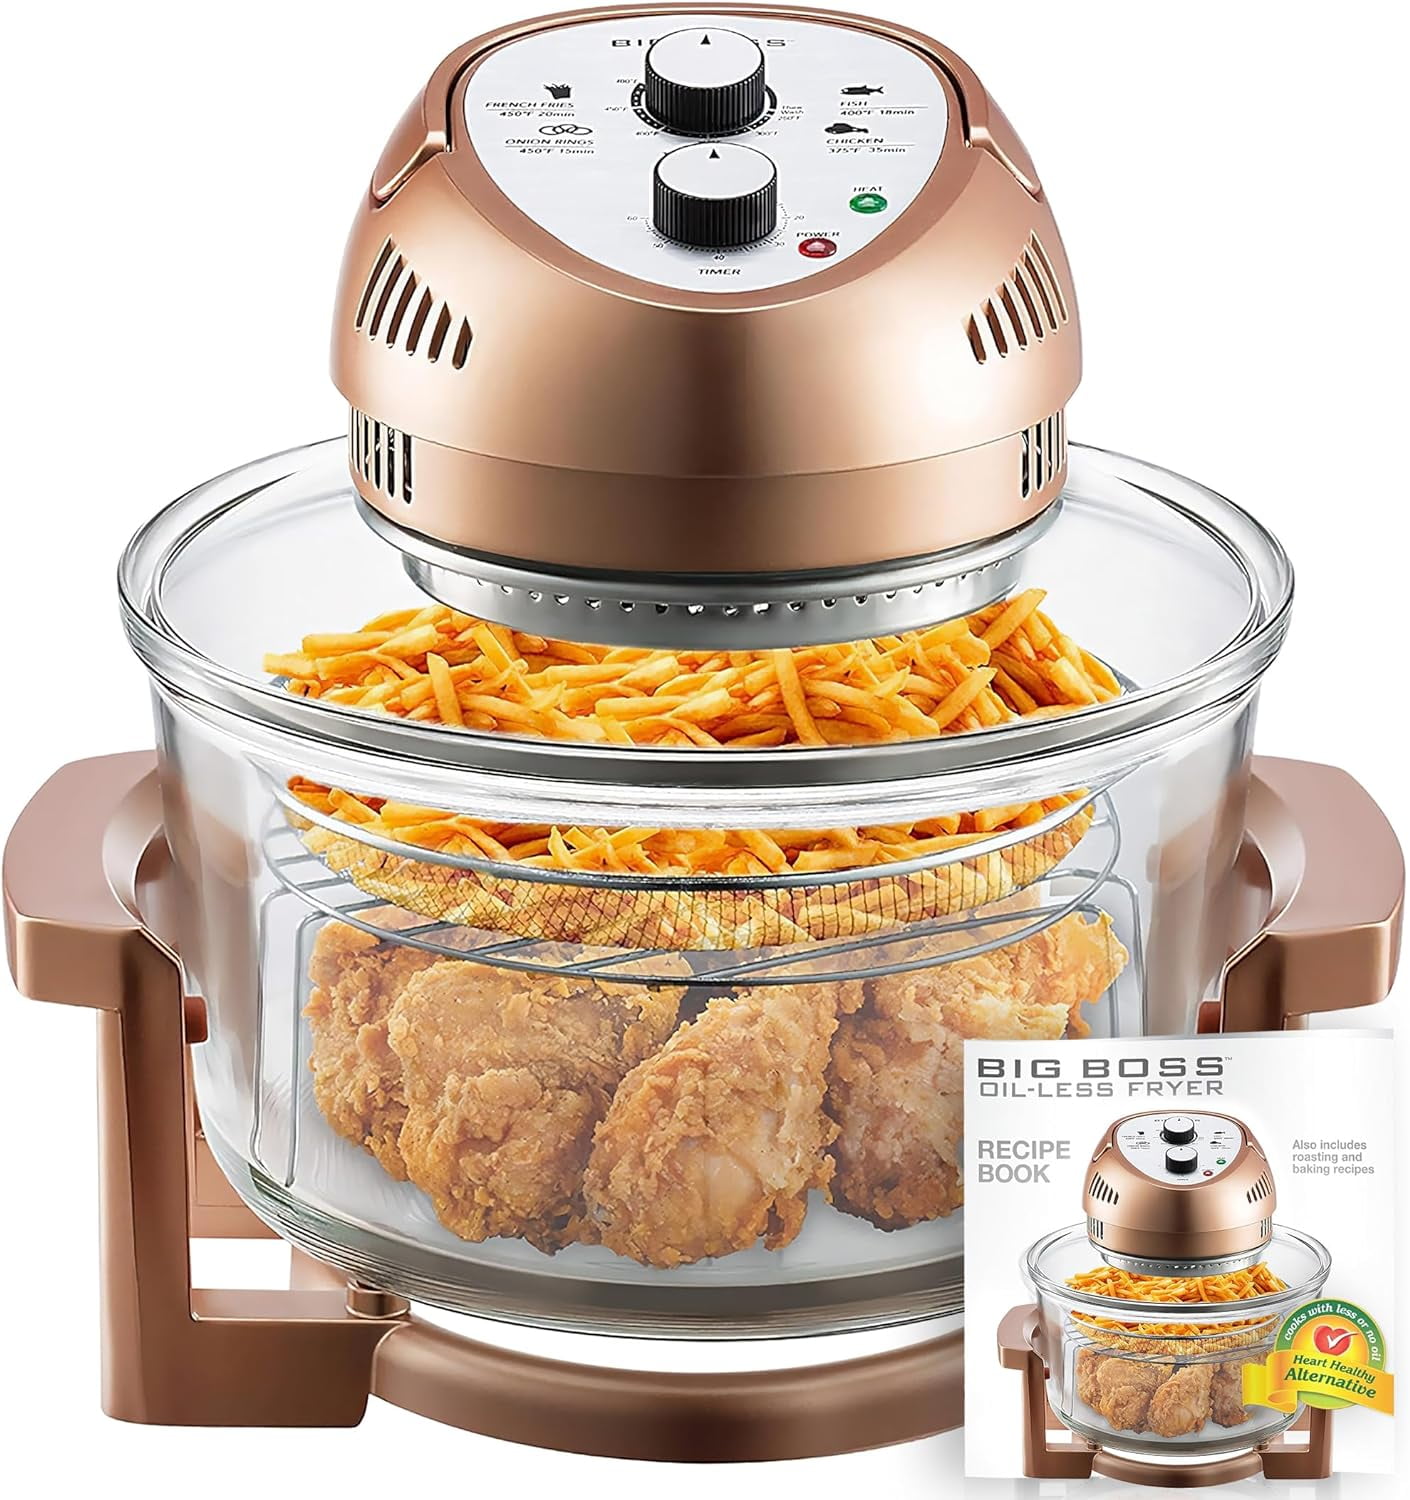 Big Boss Air Fryer  Mississippi Hunting and Fishing Forums